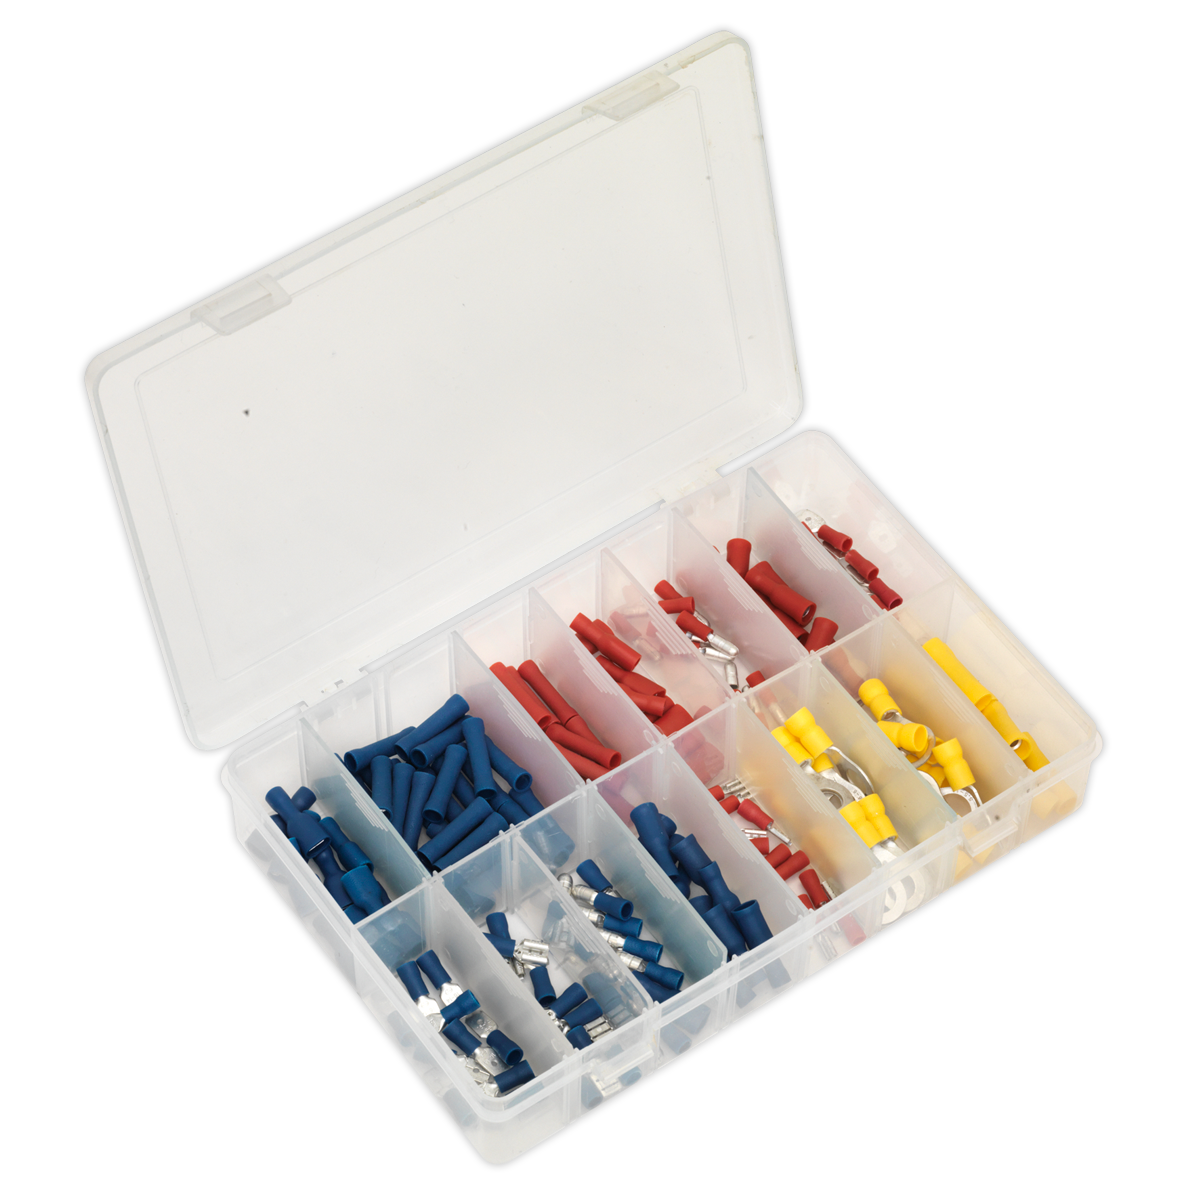 Sealey Crimp Terminal Assortment 200pc Blue, Red & Yellow